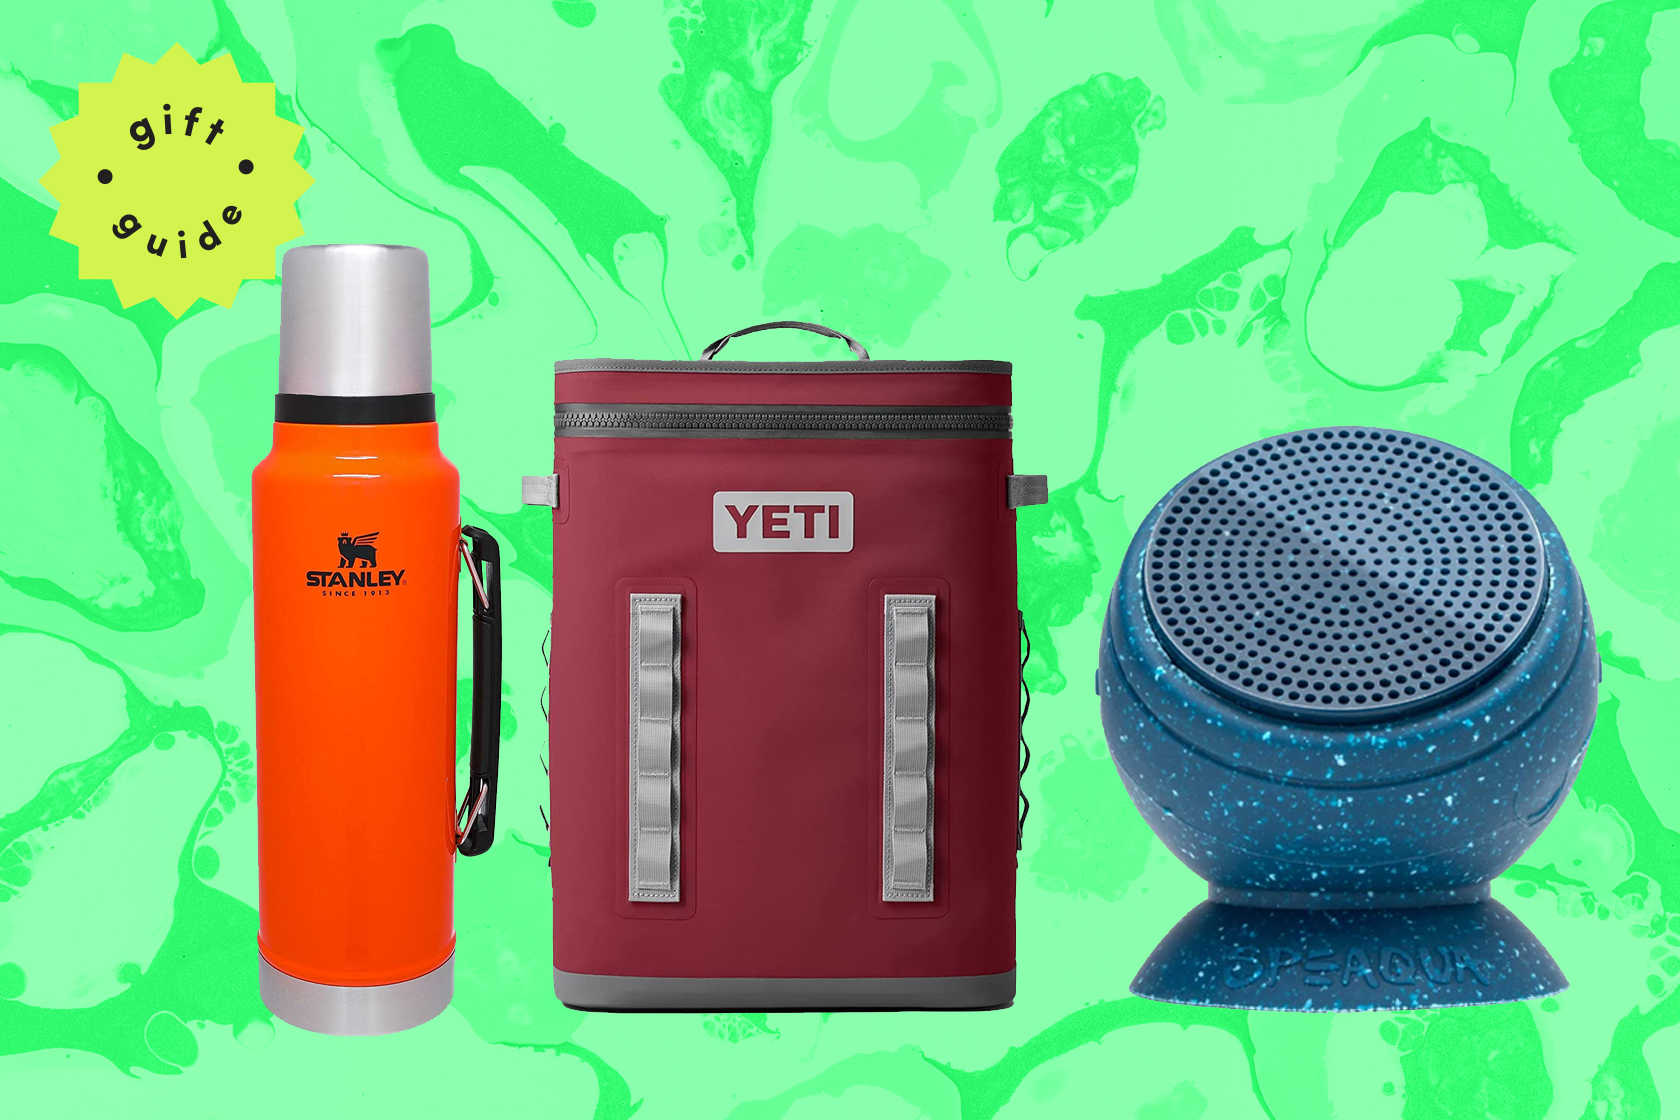 The best holiday gifts for campers